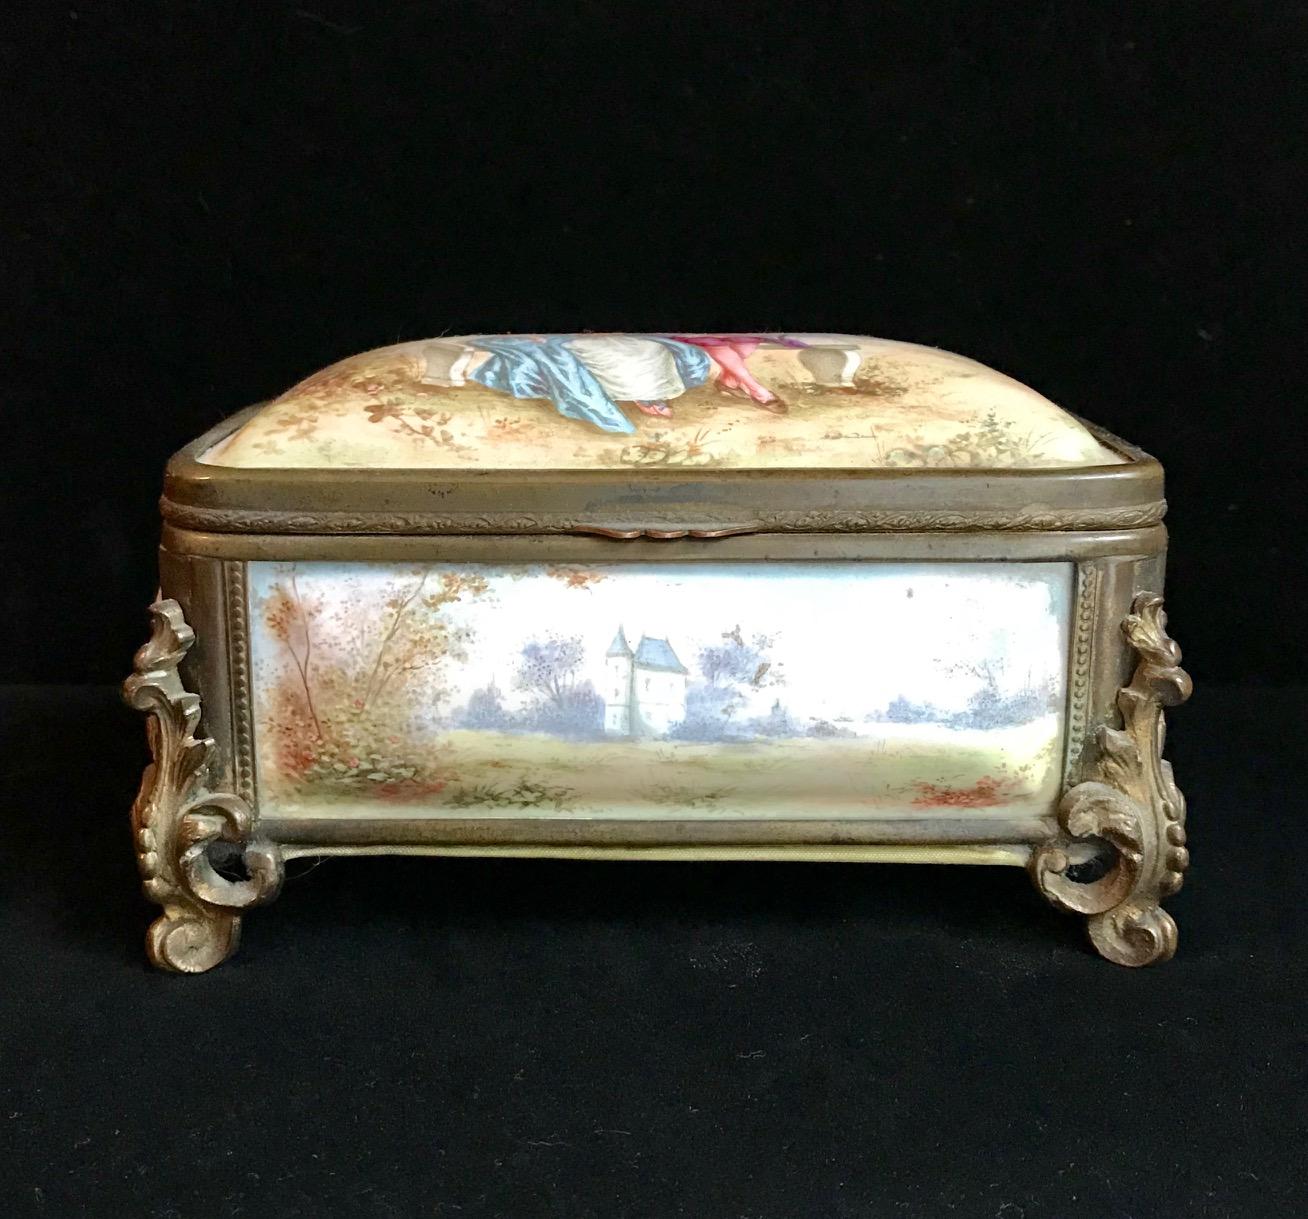 Cast 19th Century French Polychrome Enamel and Bronze Jewelry Box Casket For Sale